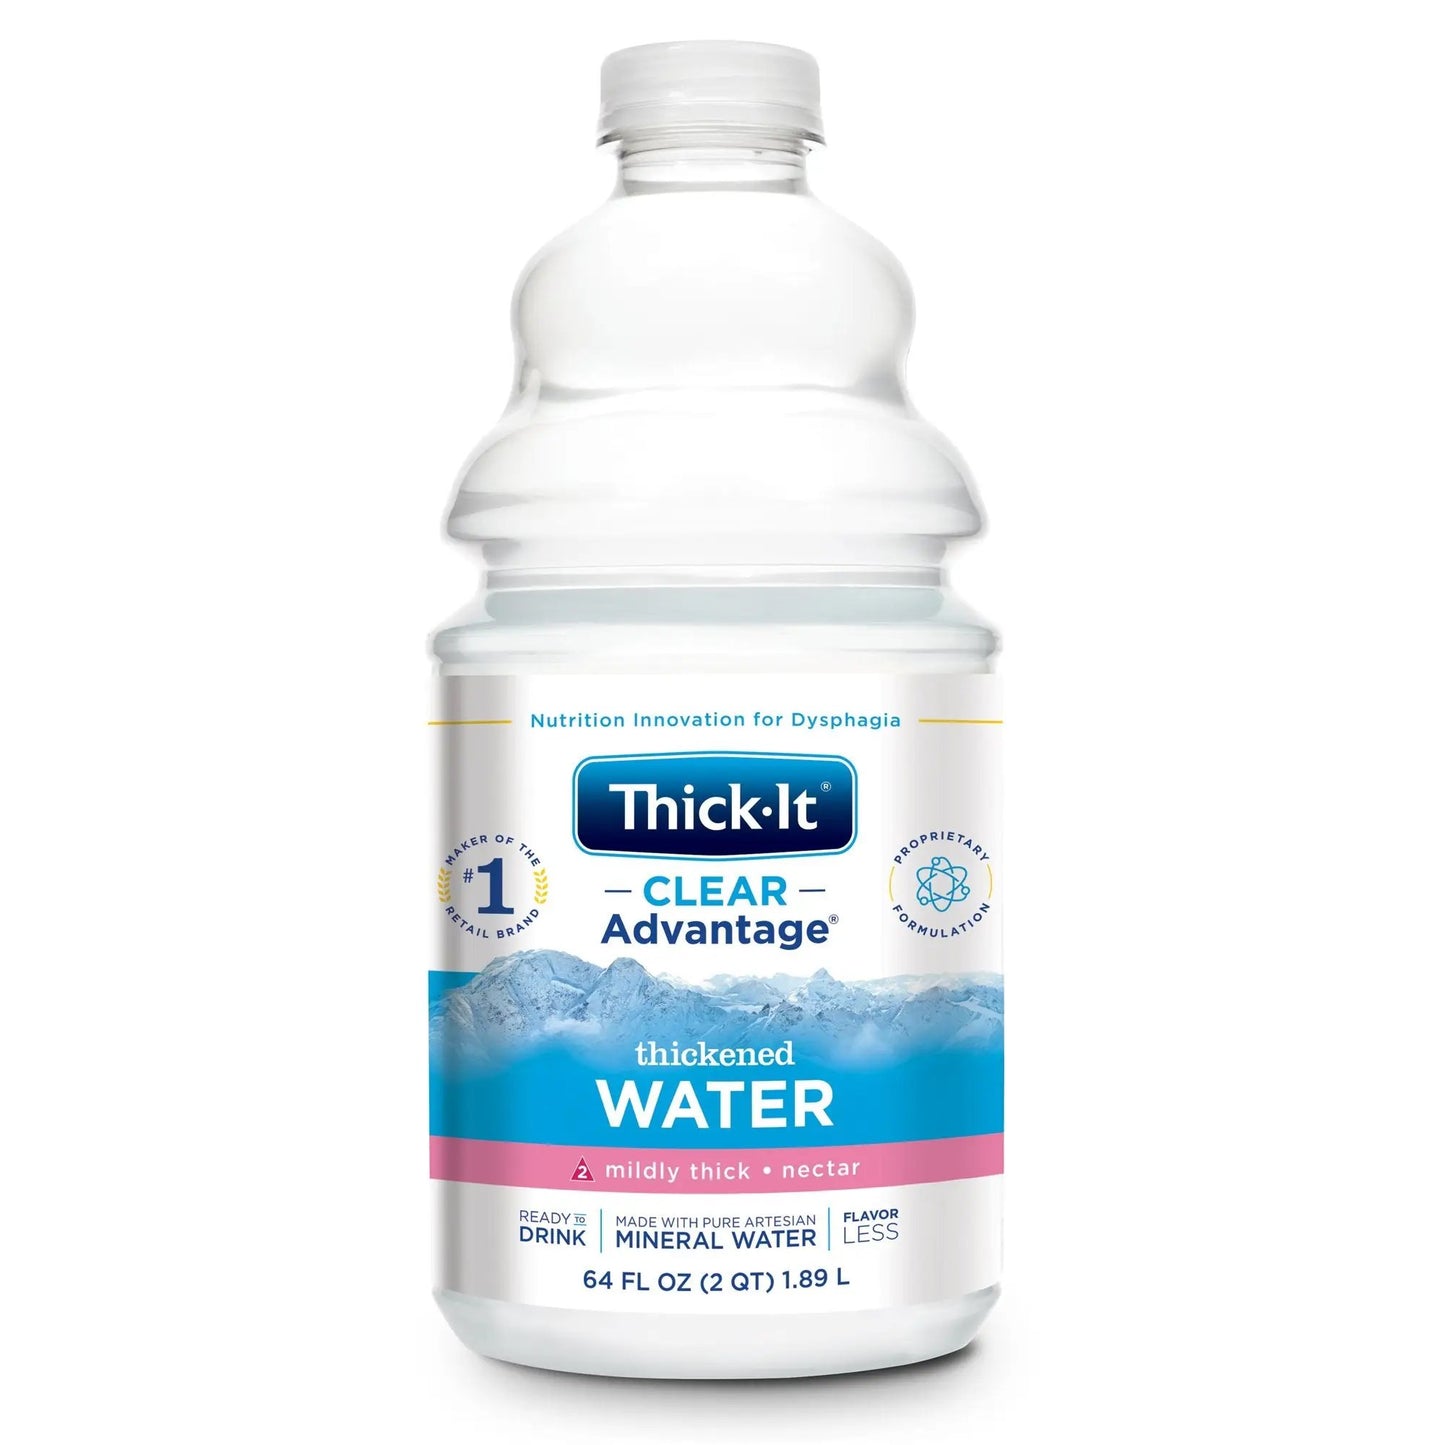 Thick-It Clear Advantage Nectar Consistency Thickened Water, 64 oz.